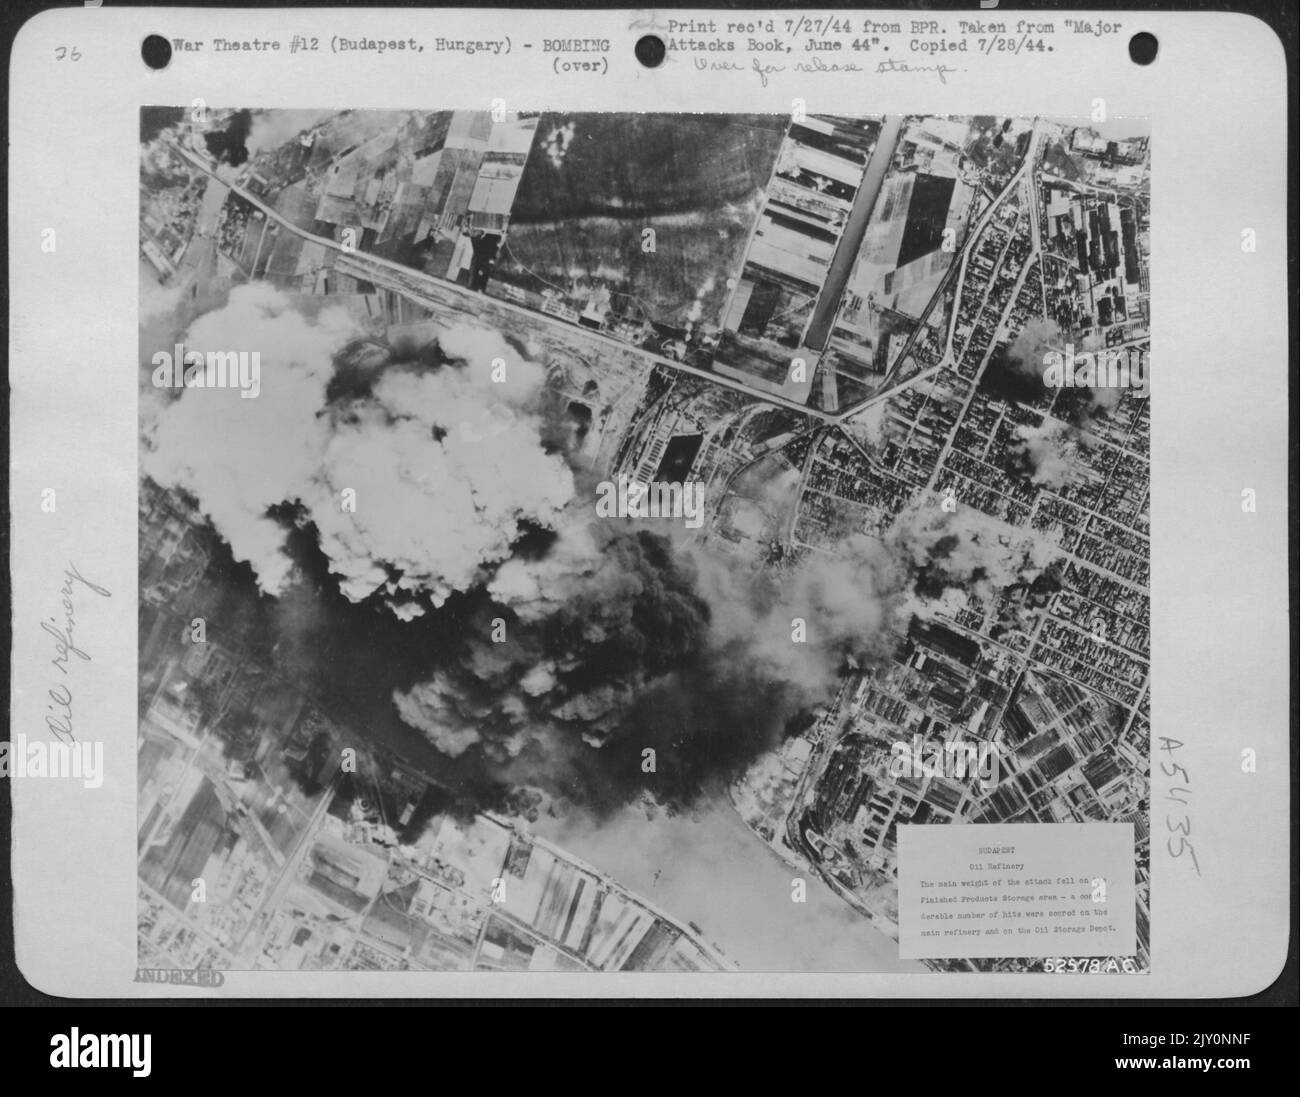 The main weight of the attack fell on the Finished Products Storage area.-A considerable number of hits were scored on the main refinery and on the Oil Storage Depot.-Budapest, Hungary. Stock Photo